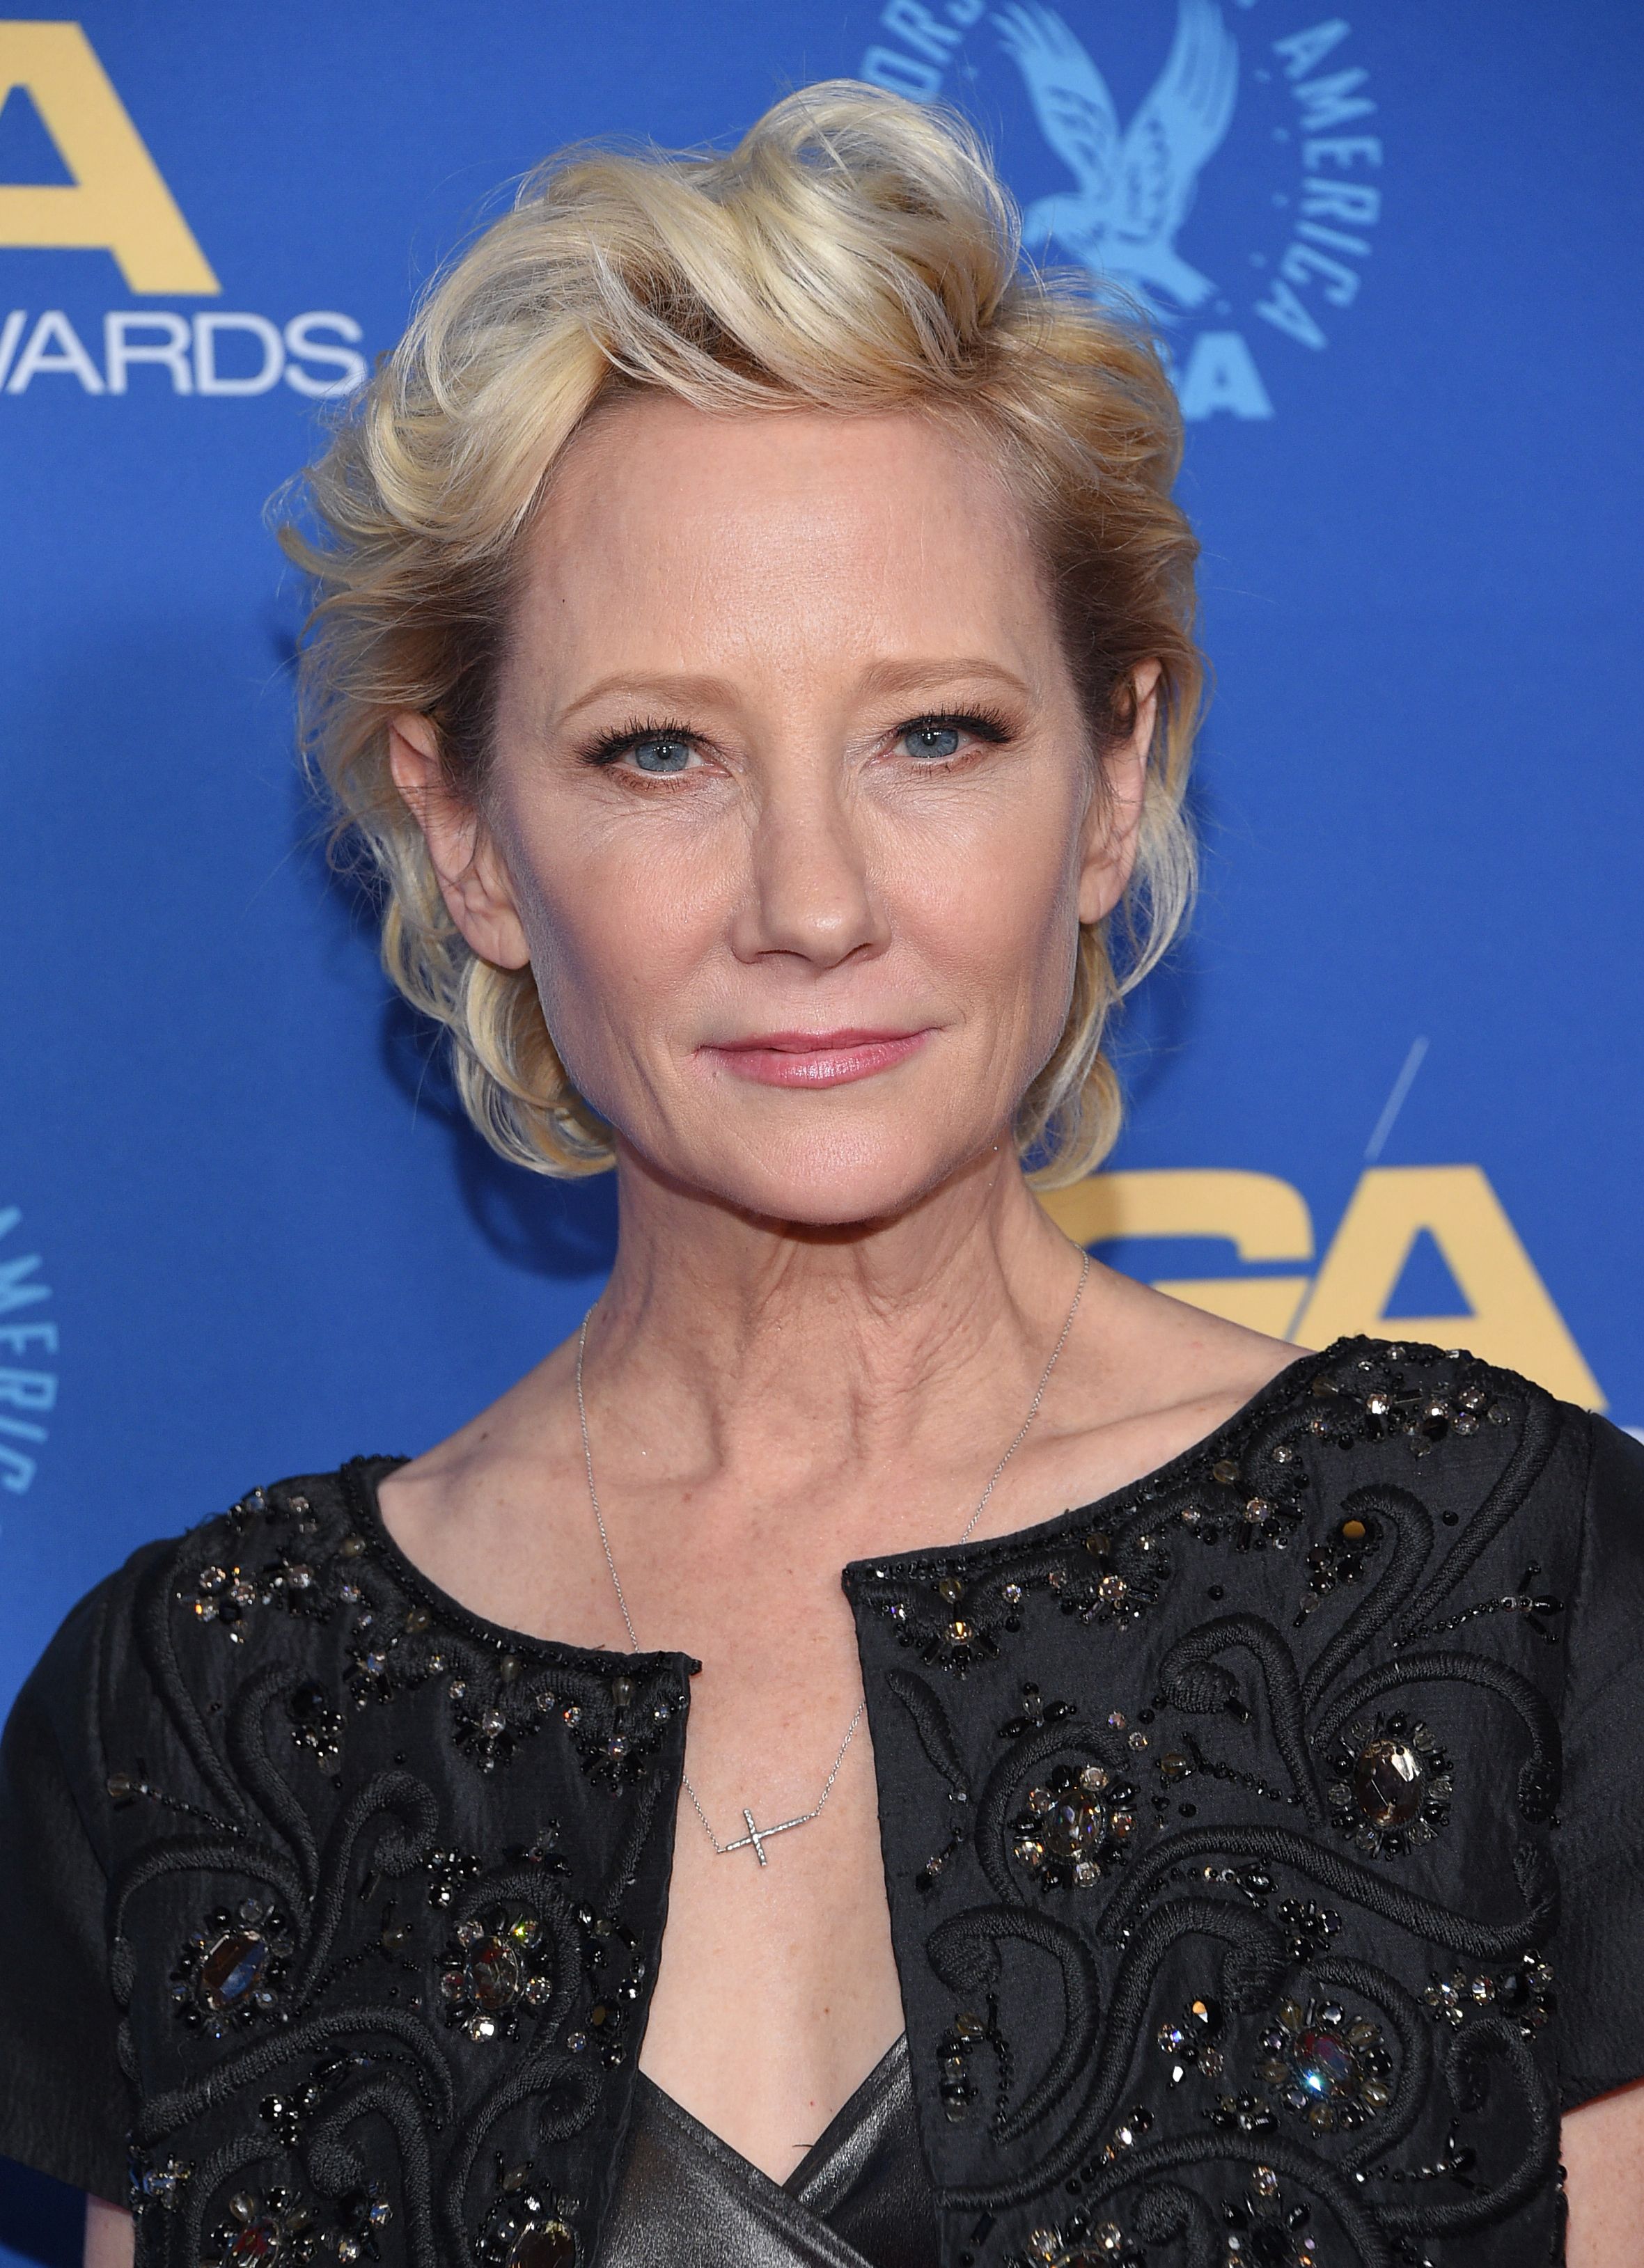 Anne Heche at the 74th annual Directors Guild of America awards at the Beverly Hilton Hotel on March 12, 2022, in California. | Source: Getty Images